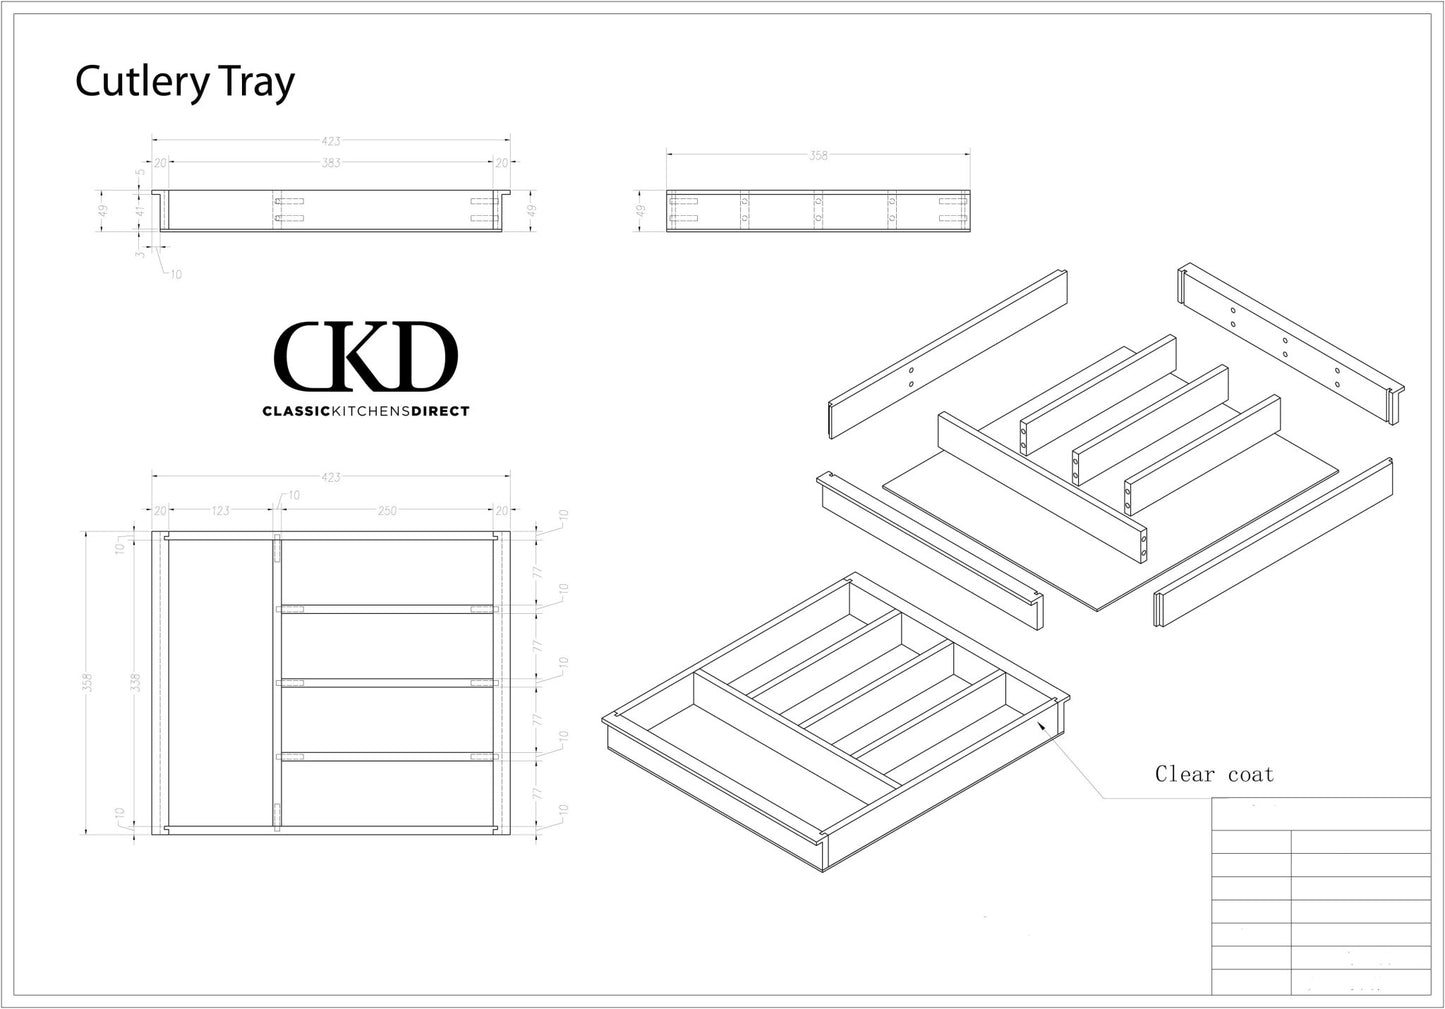 CT 1 - Cutlery tray for Drawers - Classic Kitchens Direct